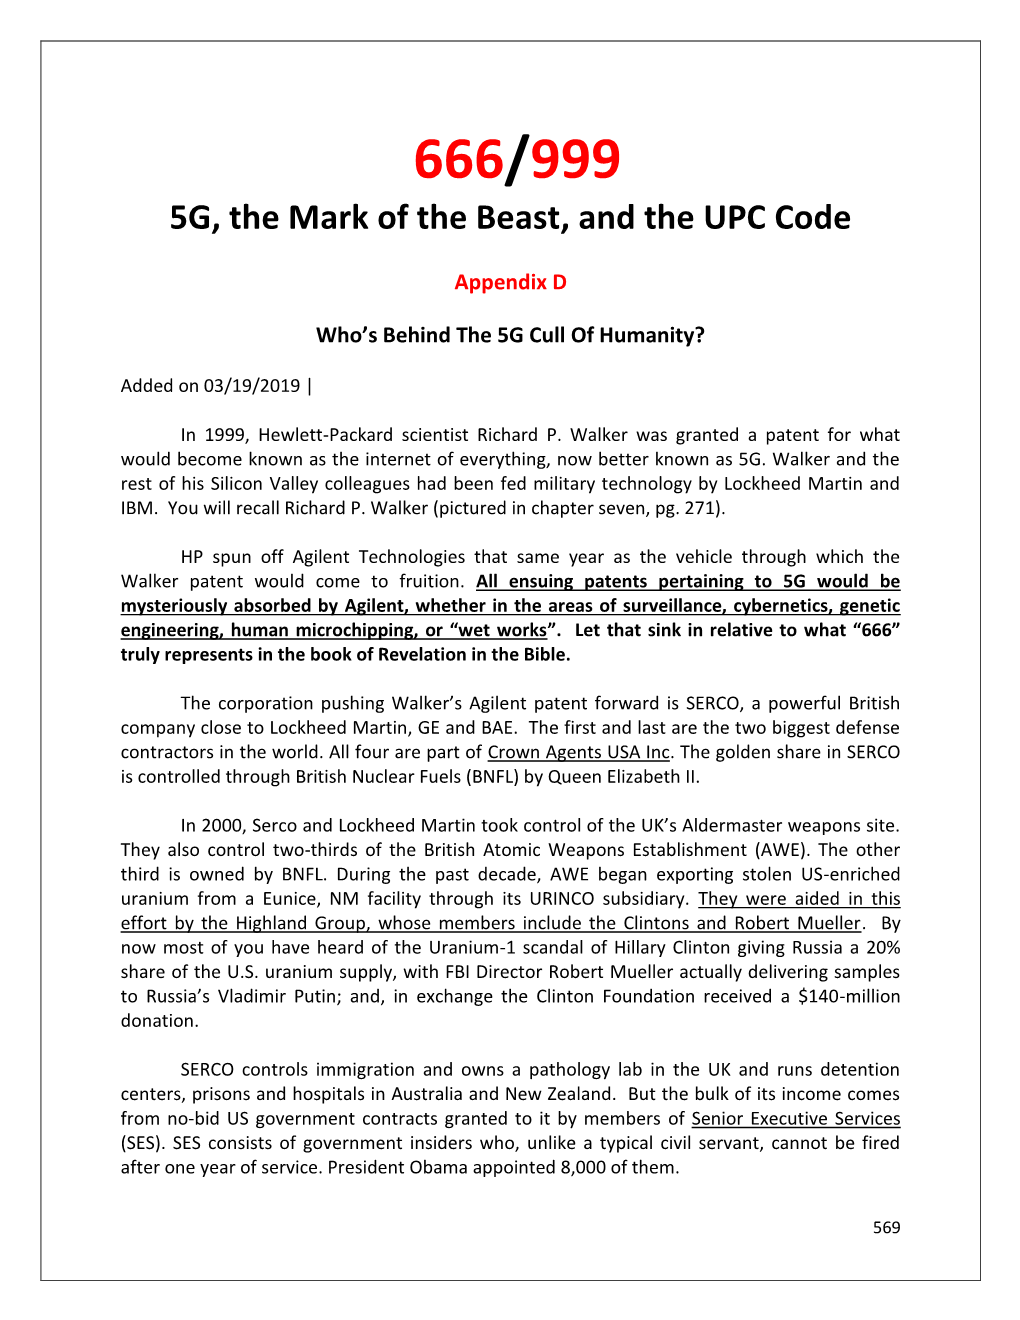 5G, the Mark of the Beast, and the UPC Code